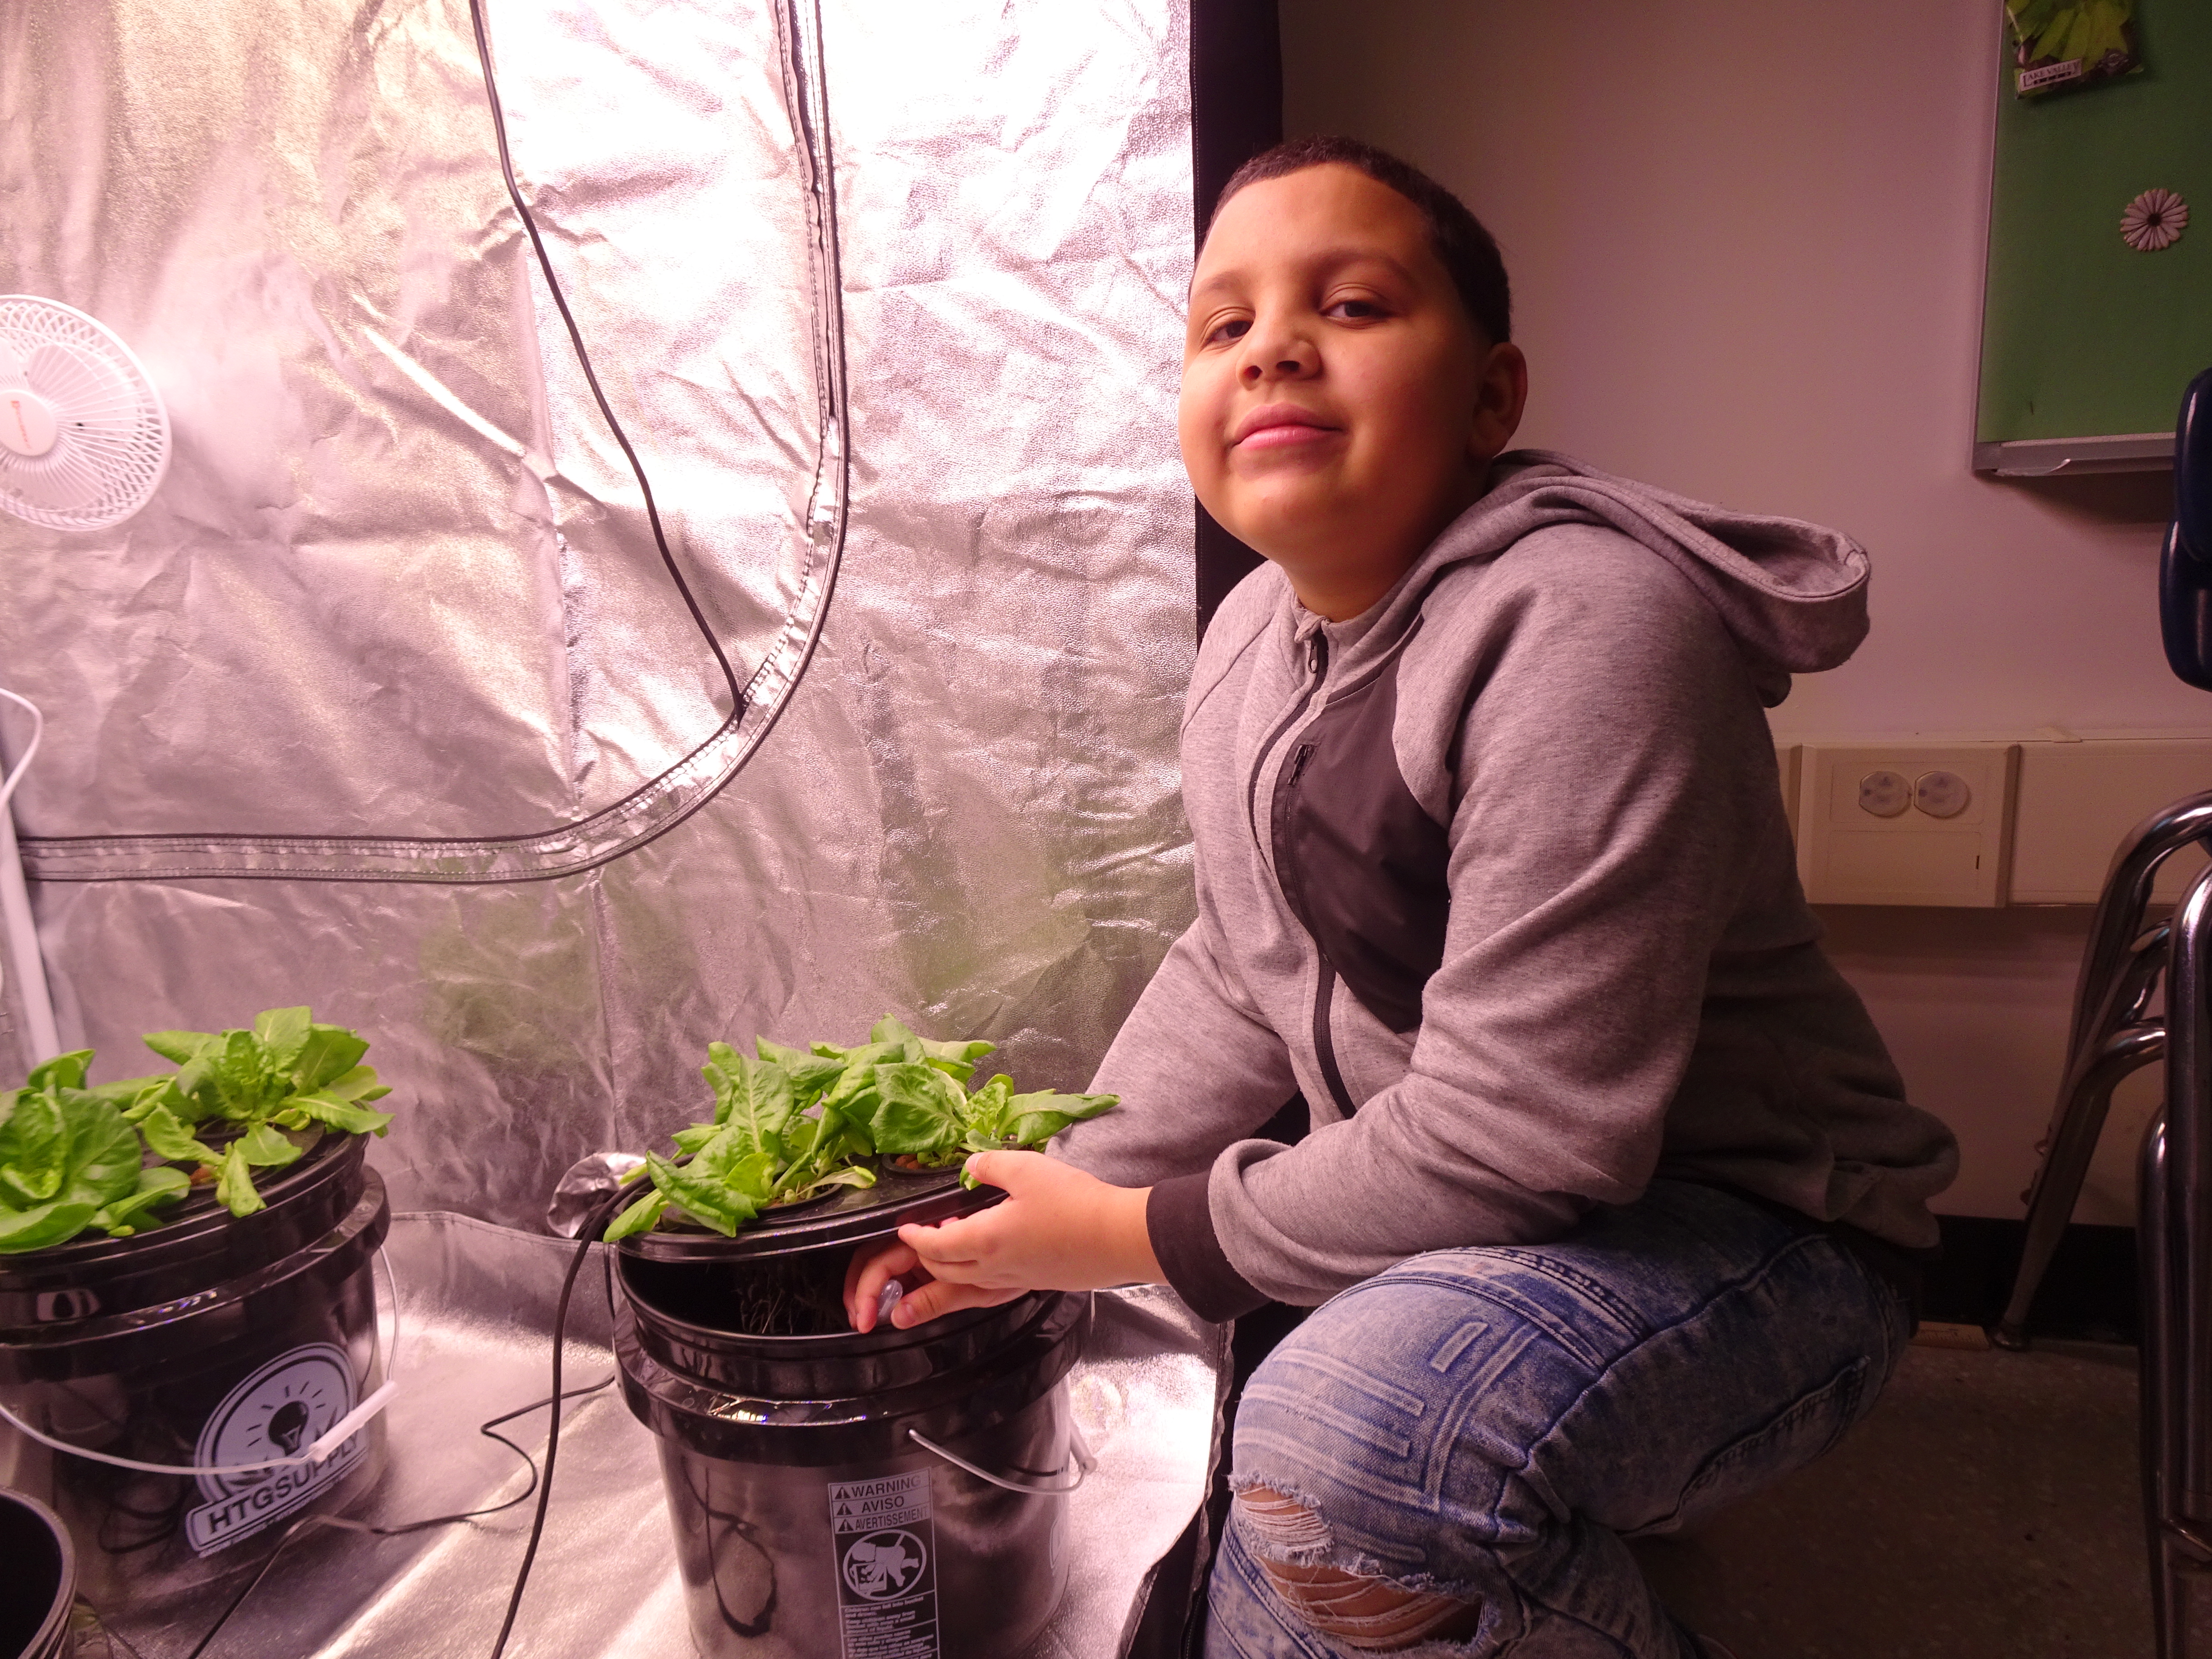 This is a photo of a STEAM @ Dr. King student standing next to a plant in a hydroponic tent, checking the water.